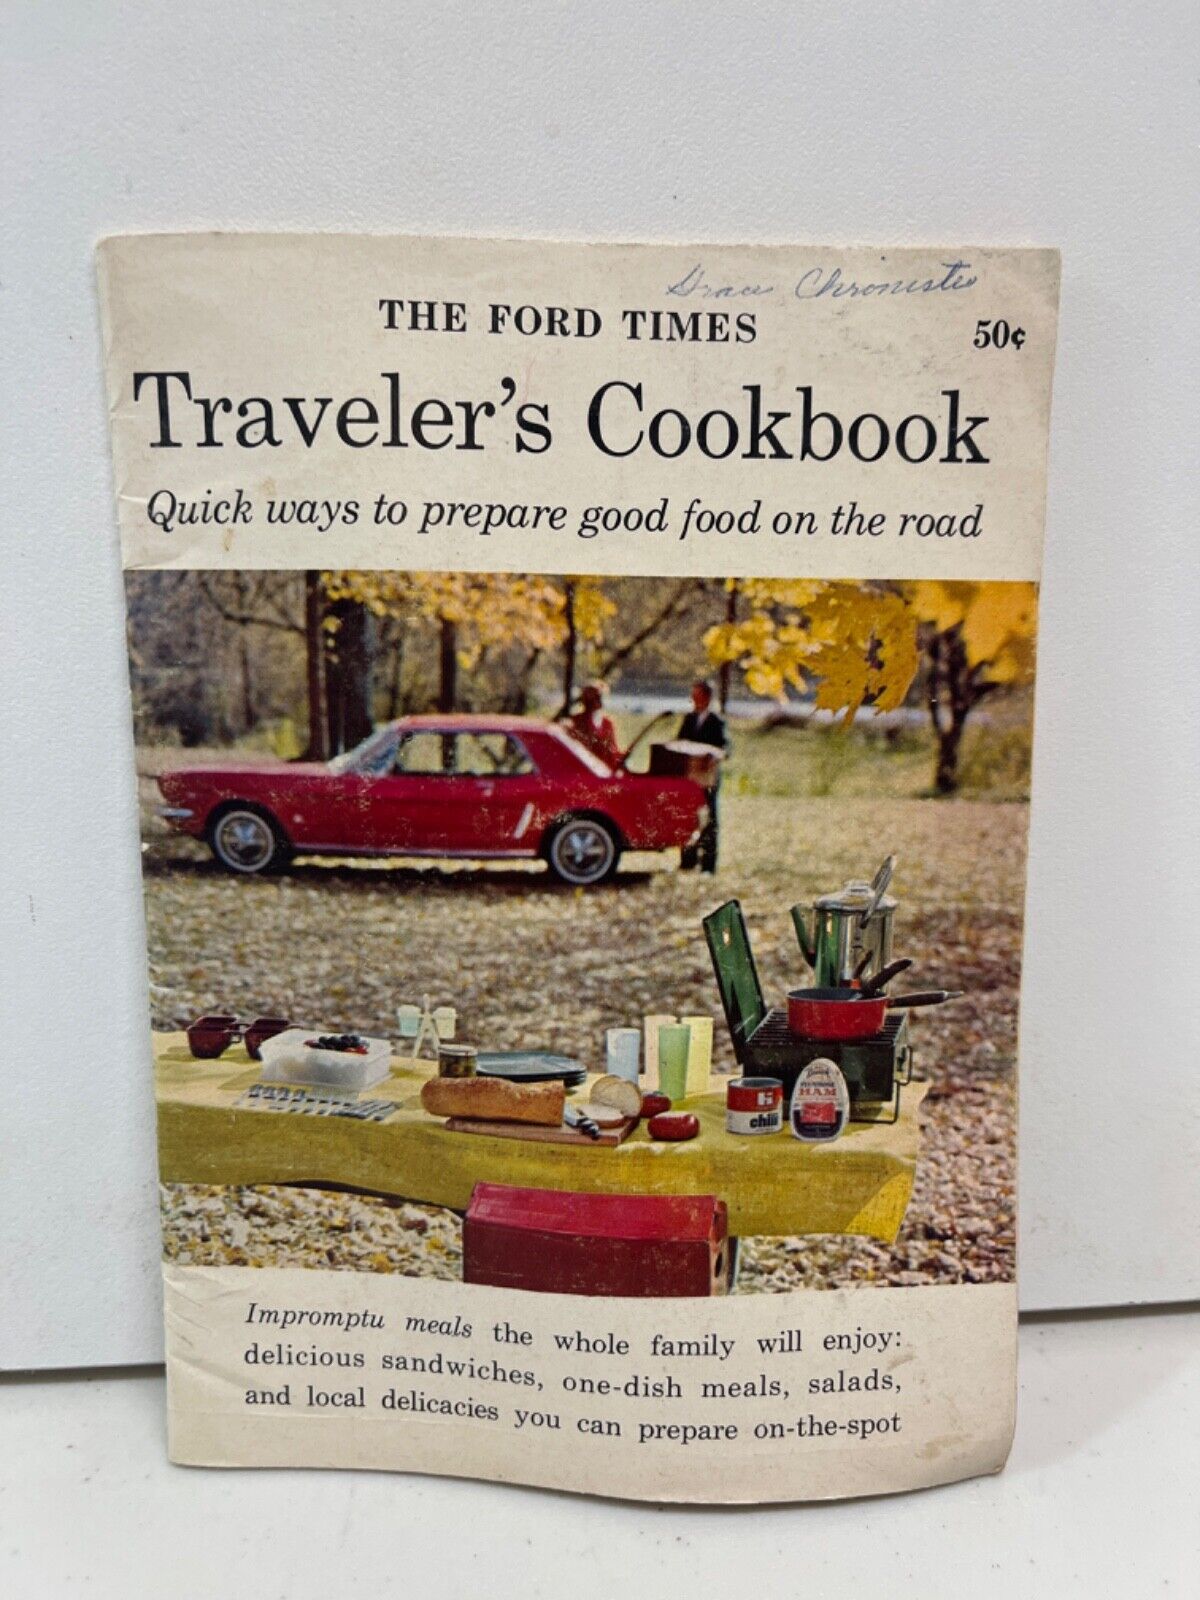 The Ford Times - The Traveler's Cookbook 1965 Ford Motors